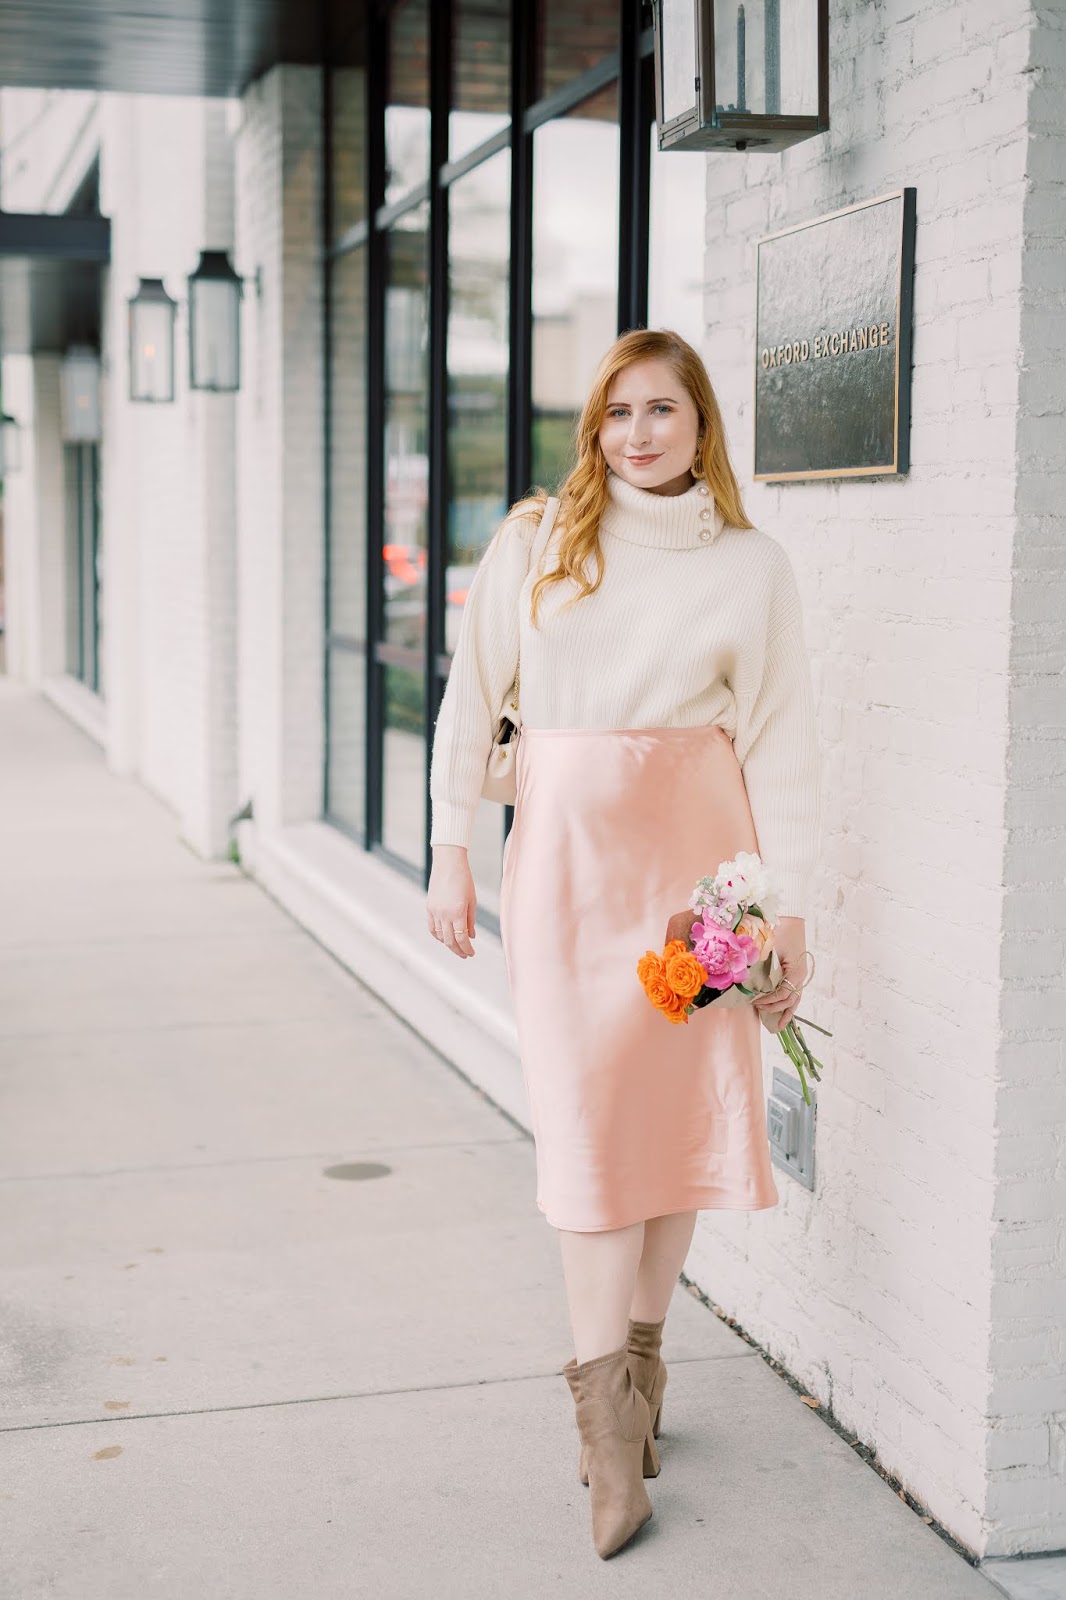 Where to Snag The Best Turtleneck Sweaters Under $50 | Style Blogger Amanda Burrows of Affordable by Amanda wears a cream chunky rib-knit turtleneck from H&M and a pink satin midi skirt from LC Lauren Conrads Kohl's collection at Oxford Exchange in Tampa, Florida. Photo taken by Studio Magnolia.